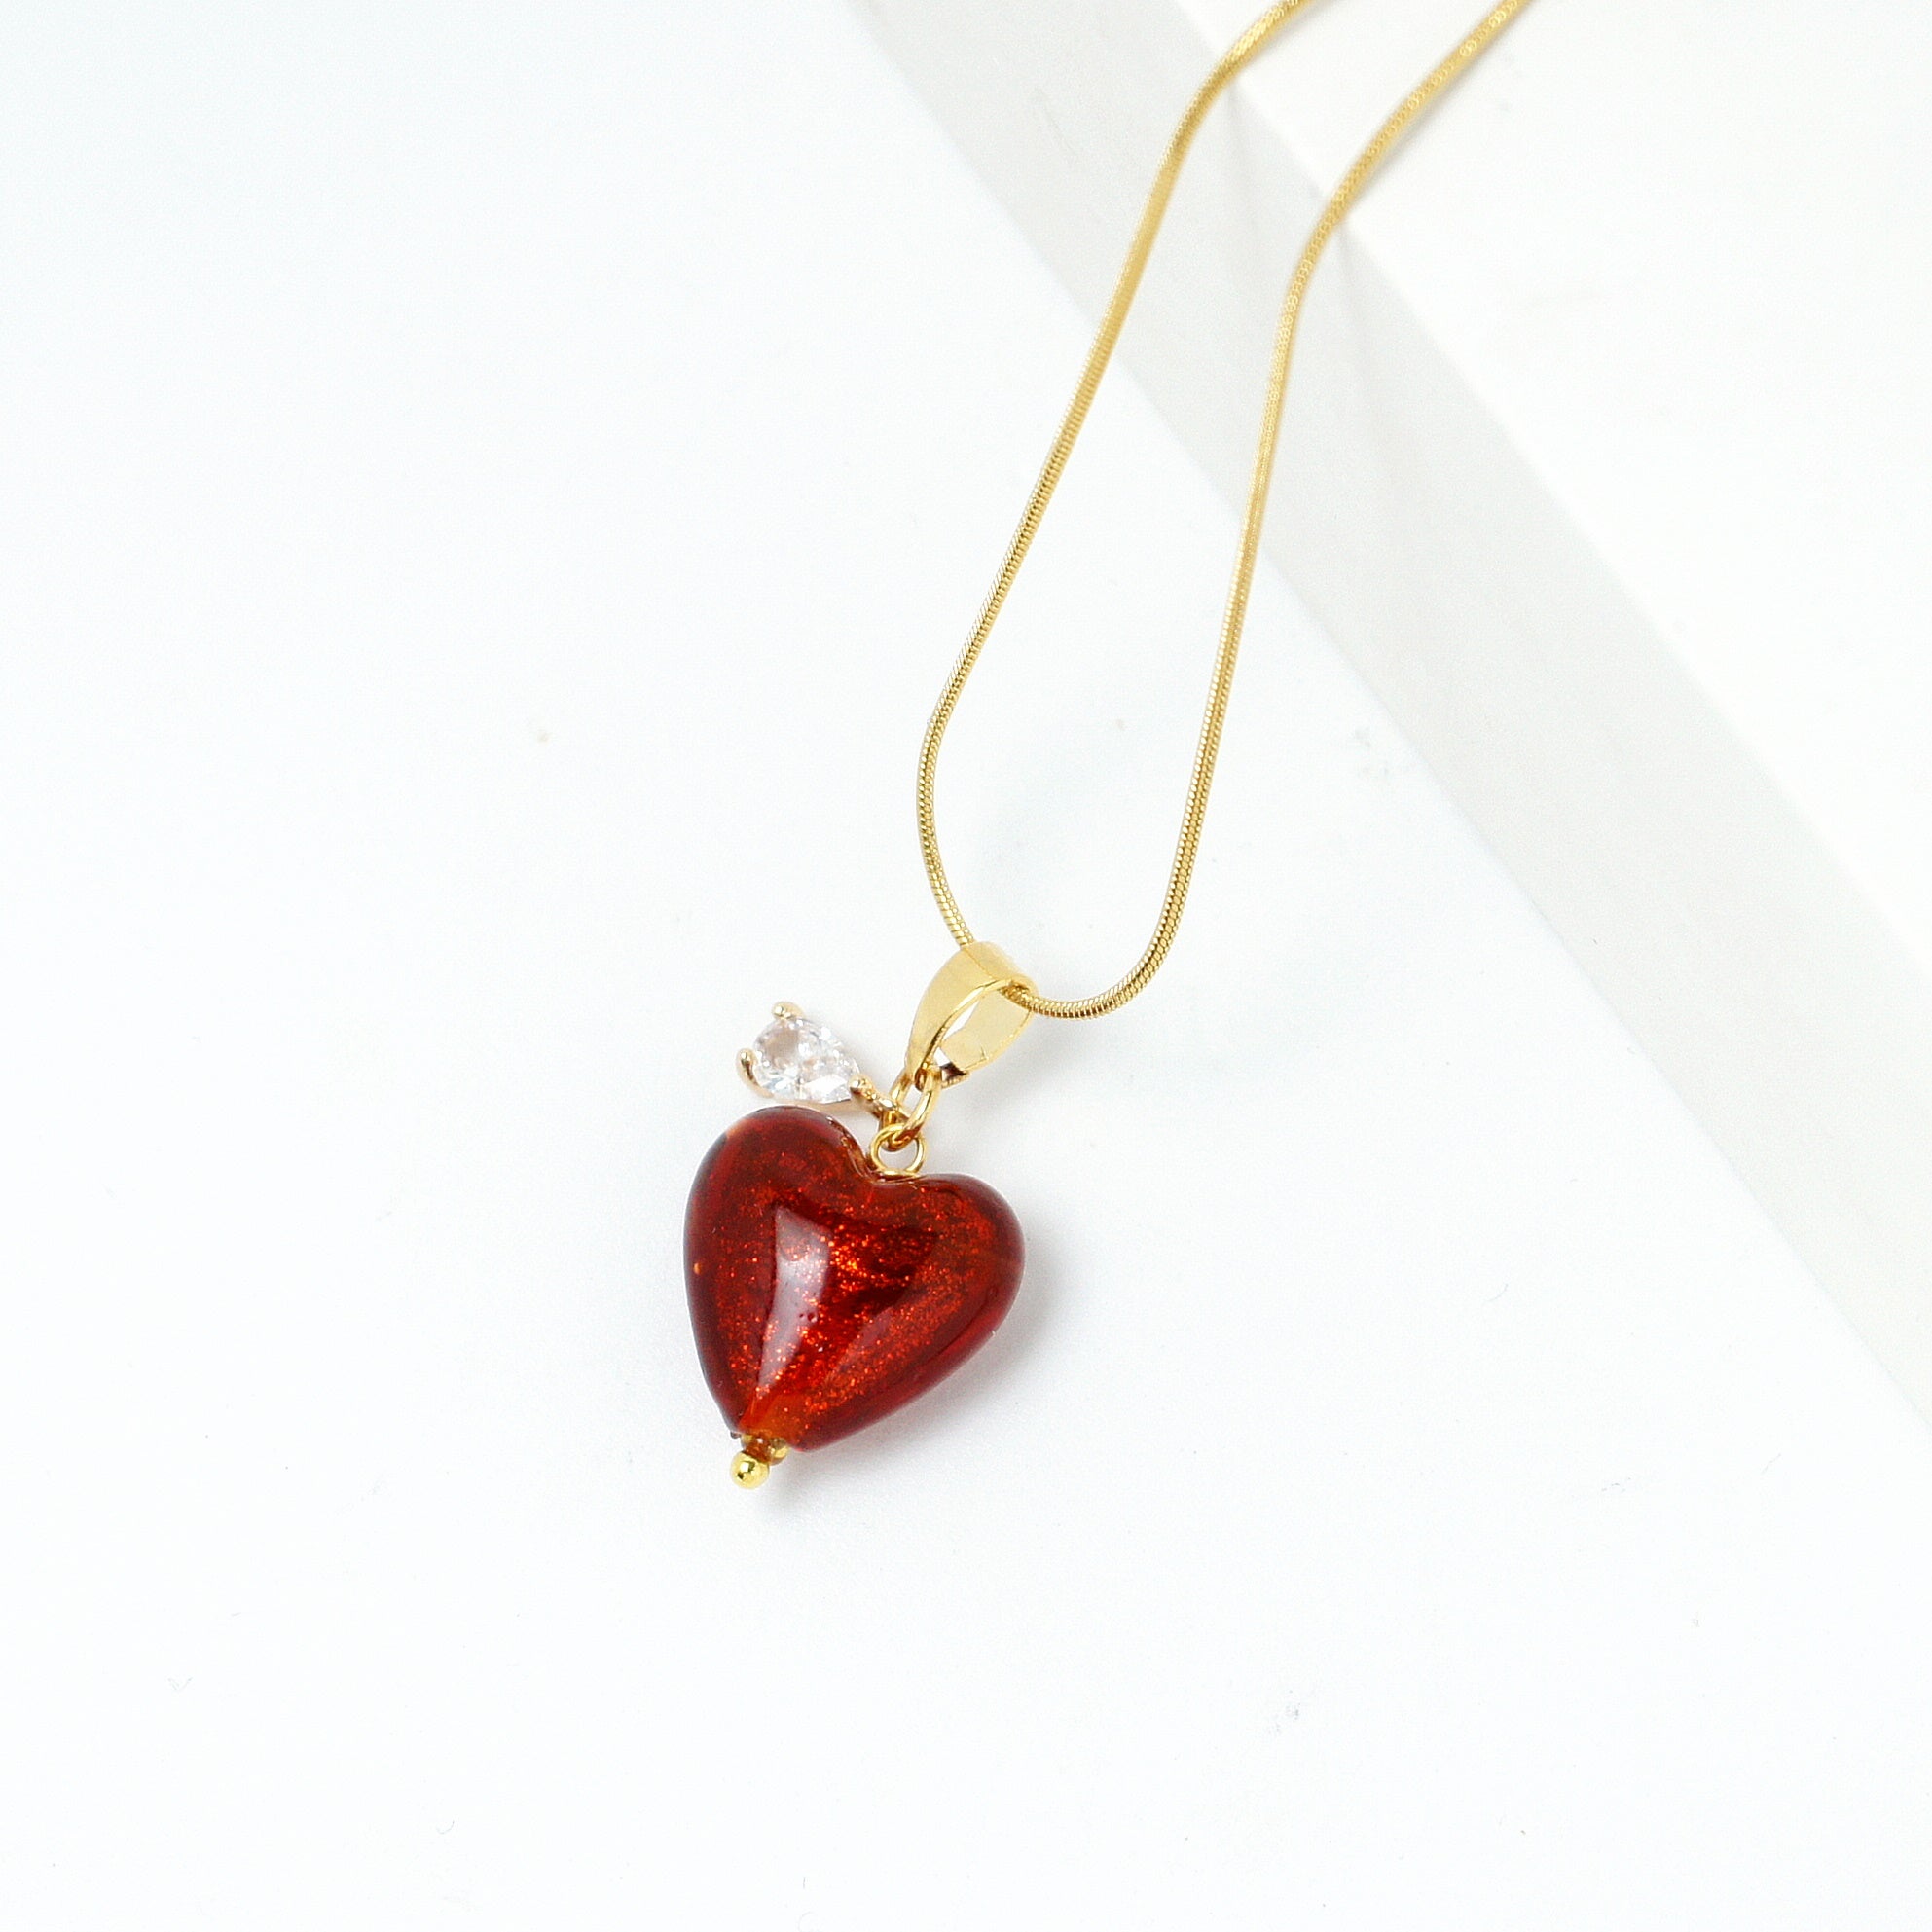 My Precious Chain Necklace with Lampwork Glass Heart Pendant